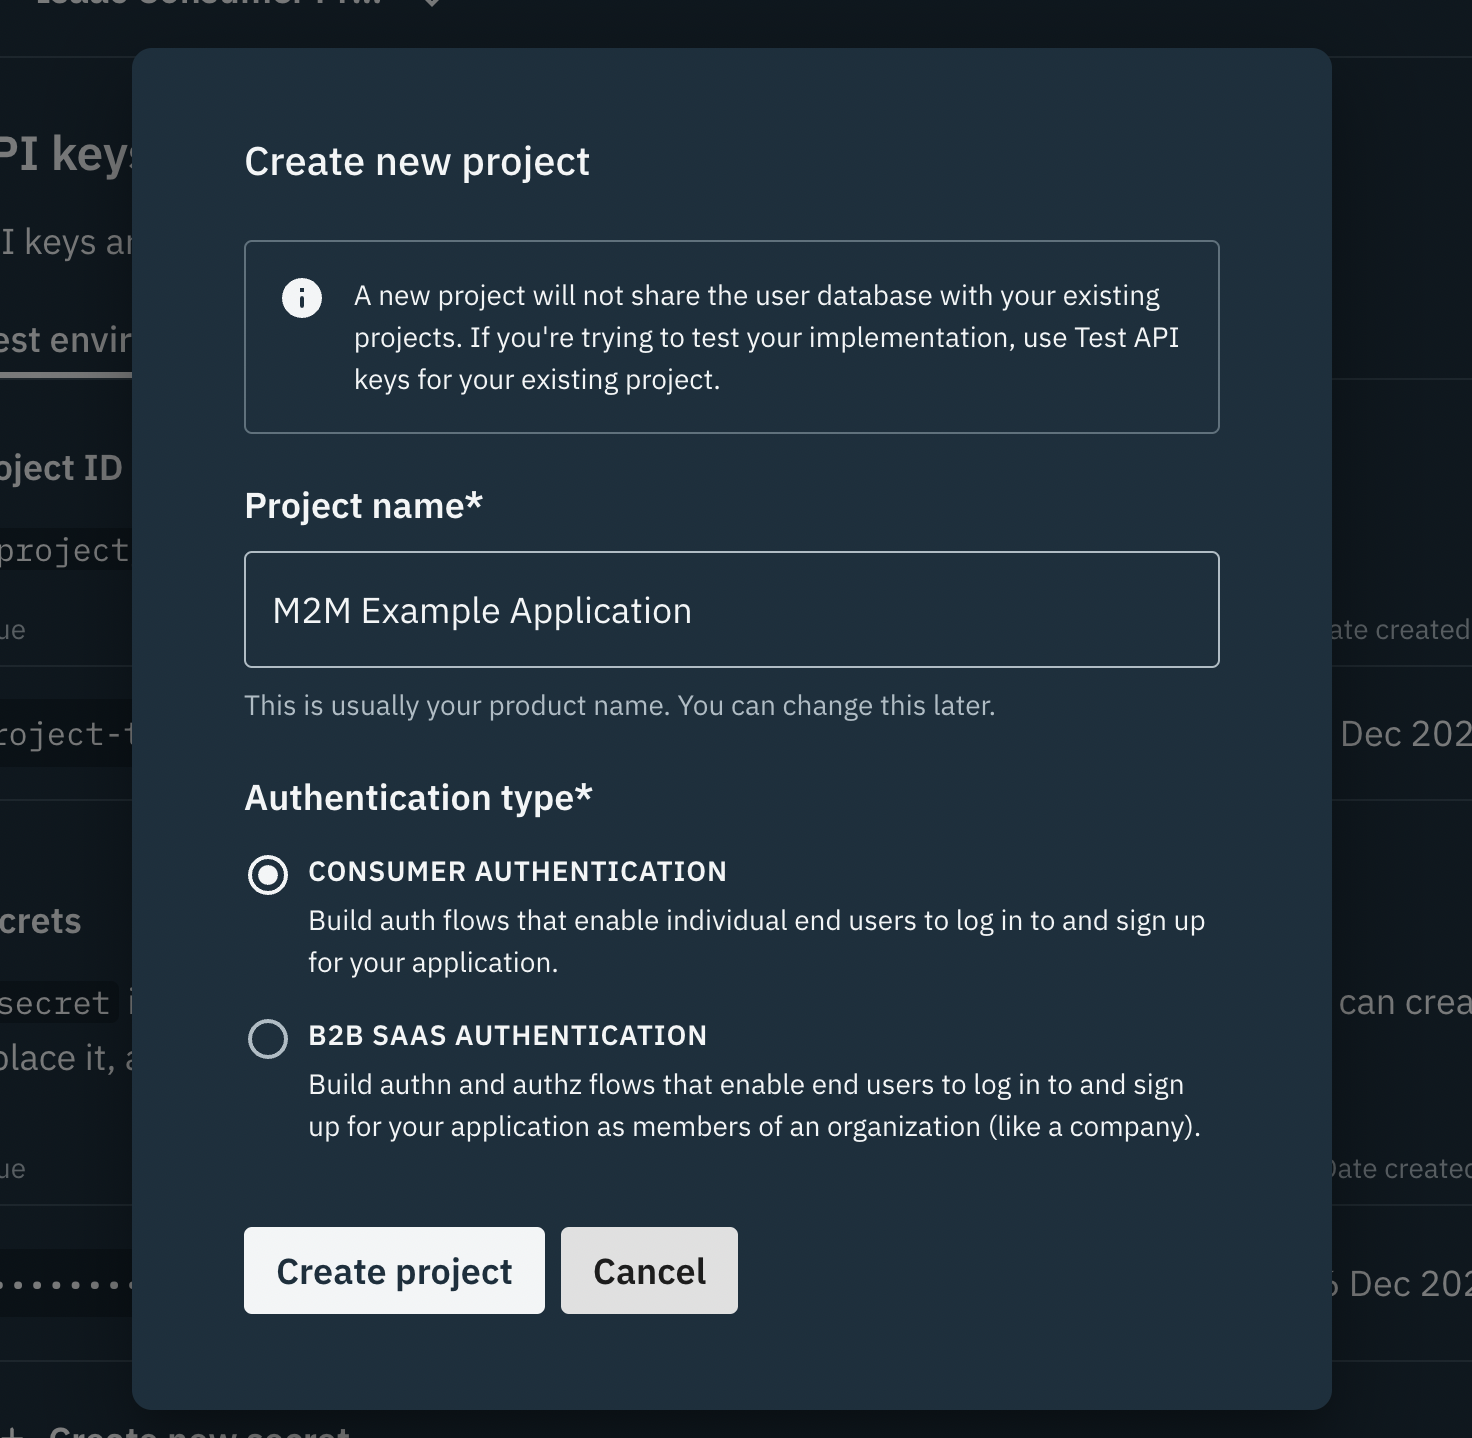 Screenshot showing how to create a new consumer authentication project on Stytch